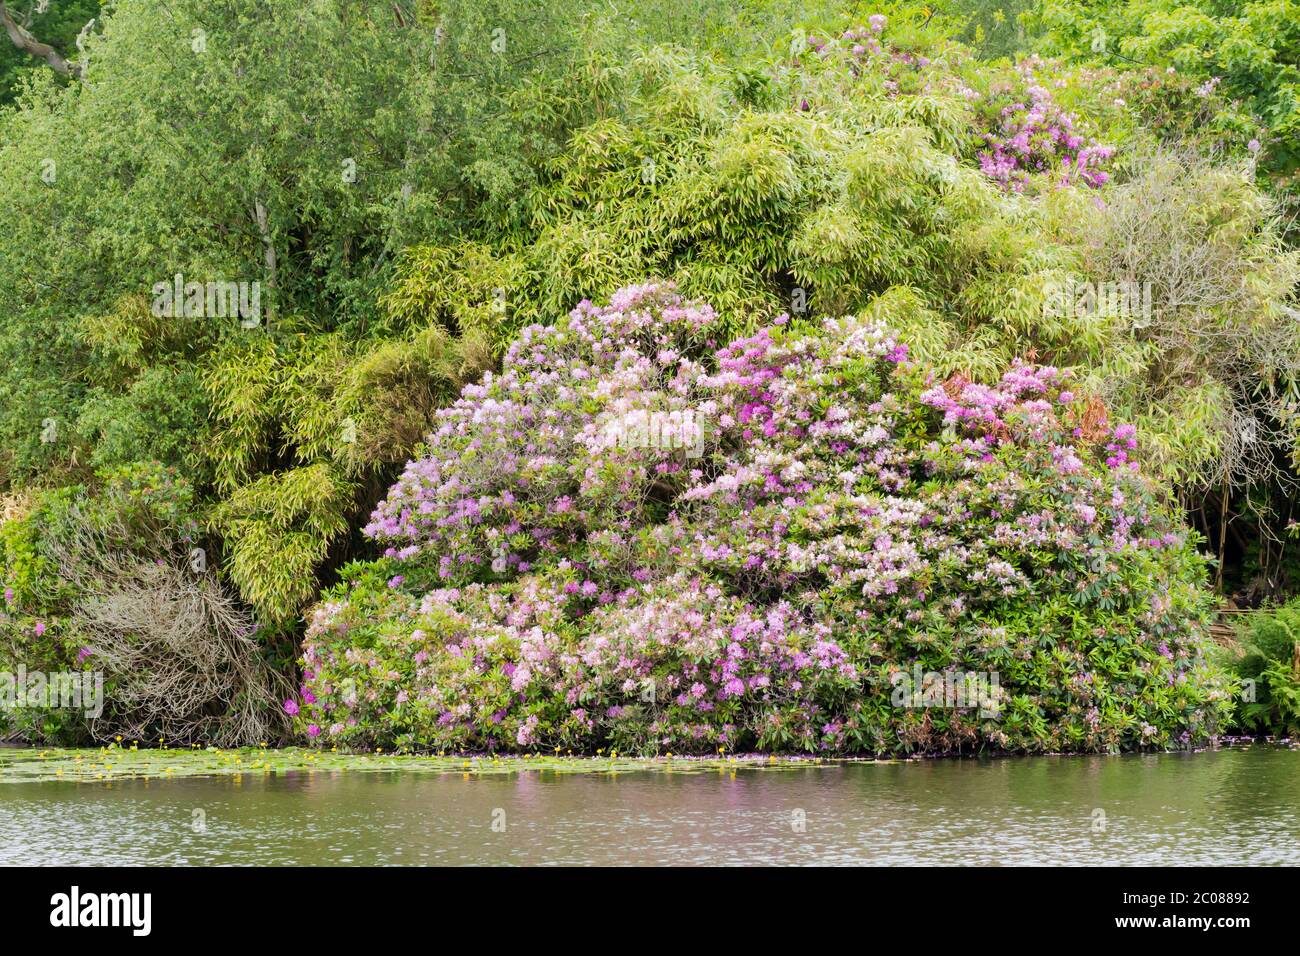 View of rhododendron ponticum flowers beside a lake in England, United Kingdom Stock Photo